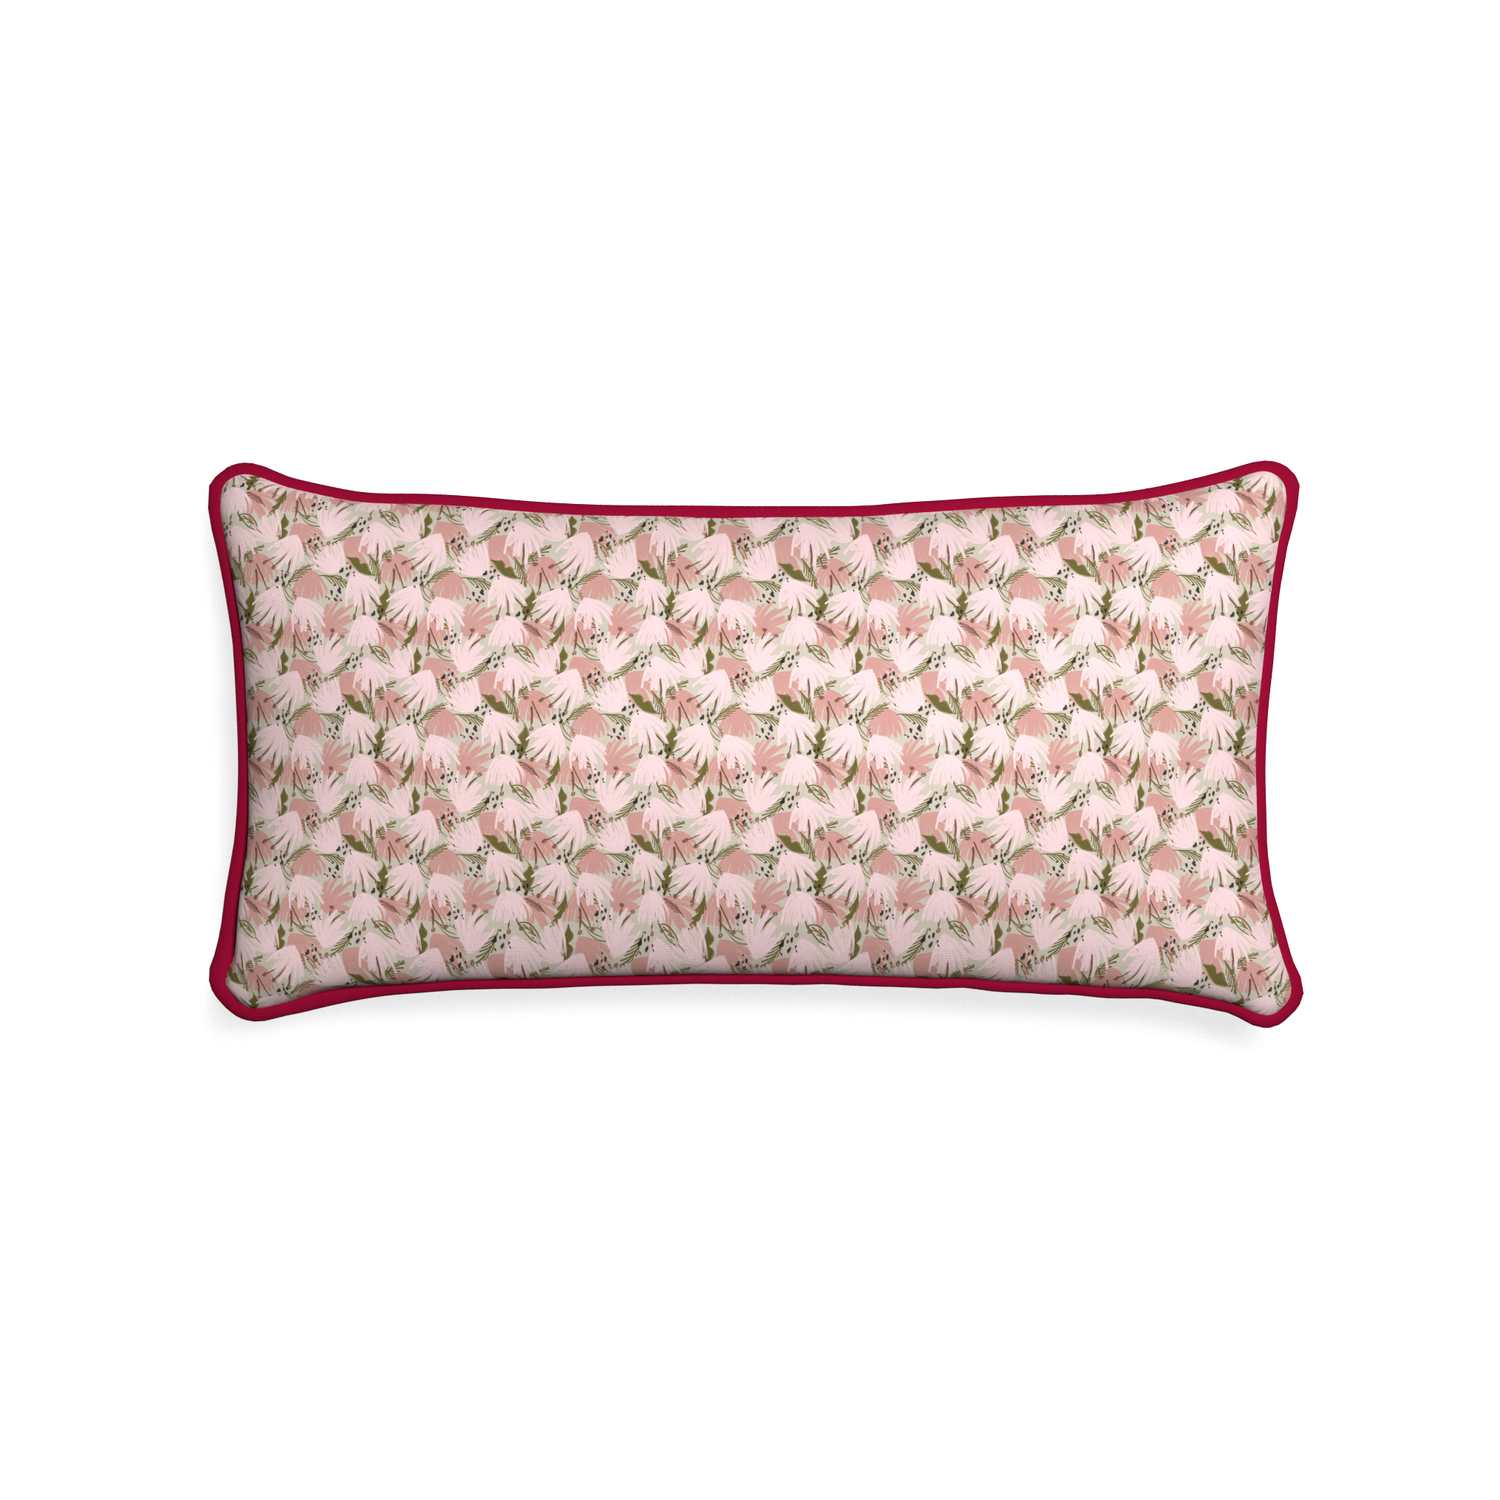 Midi-lumbar eden pink custom pink floralpillow with raspberry piping on white background